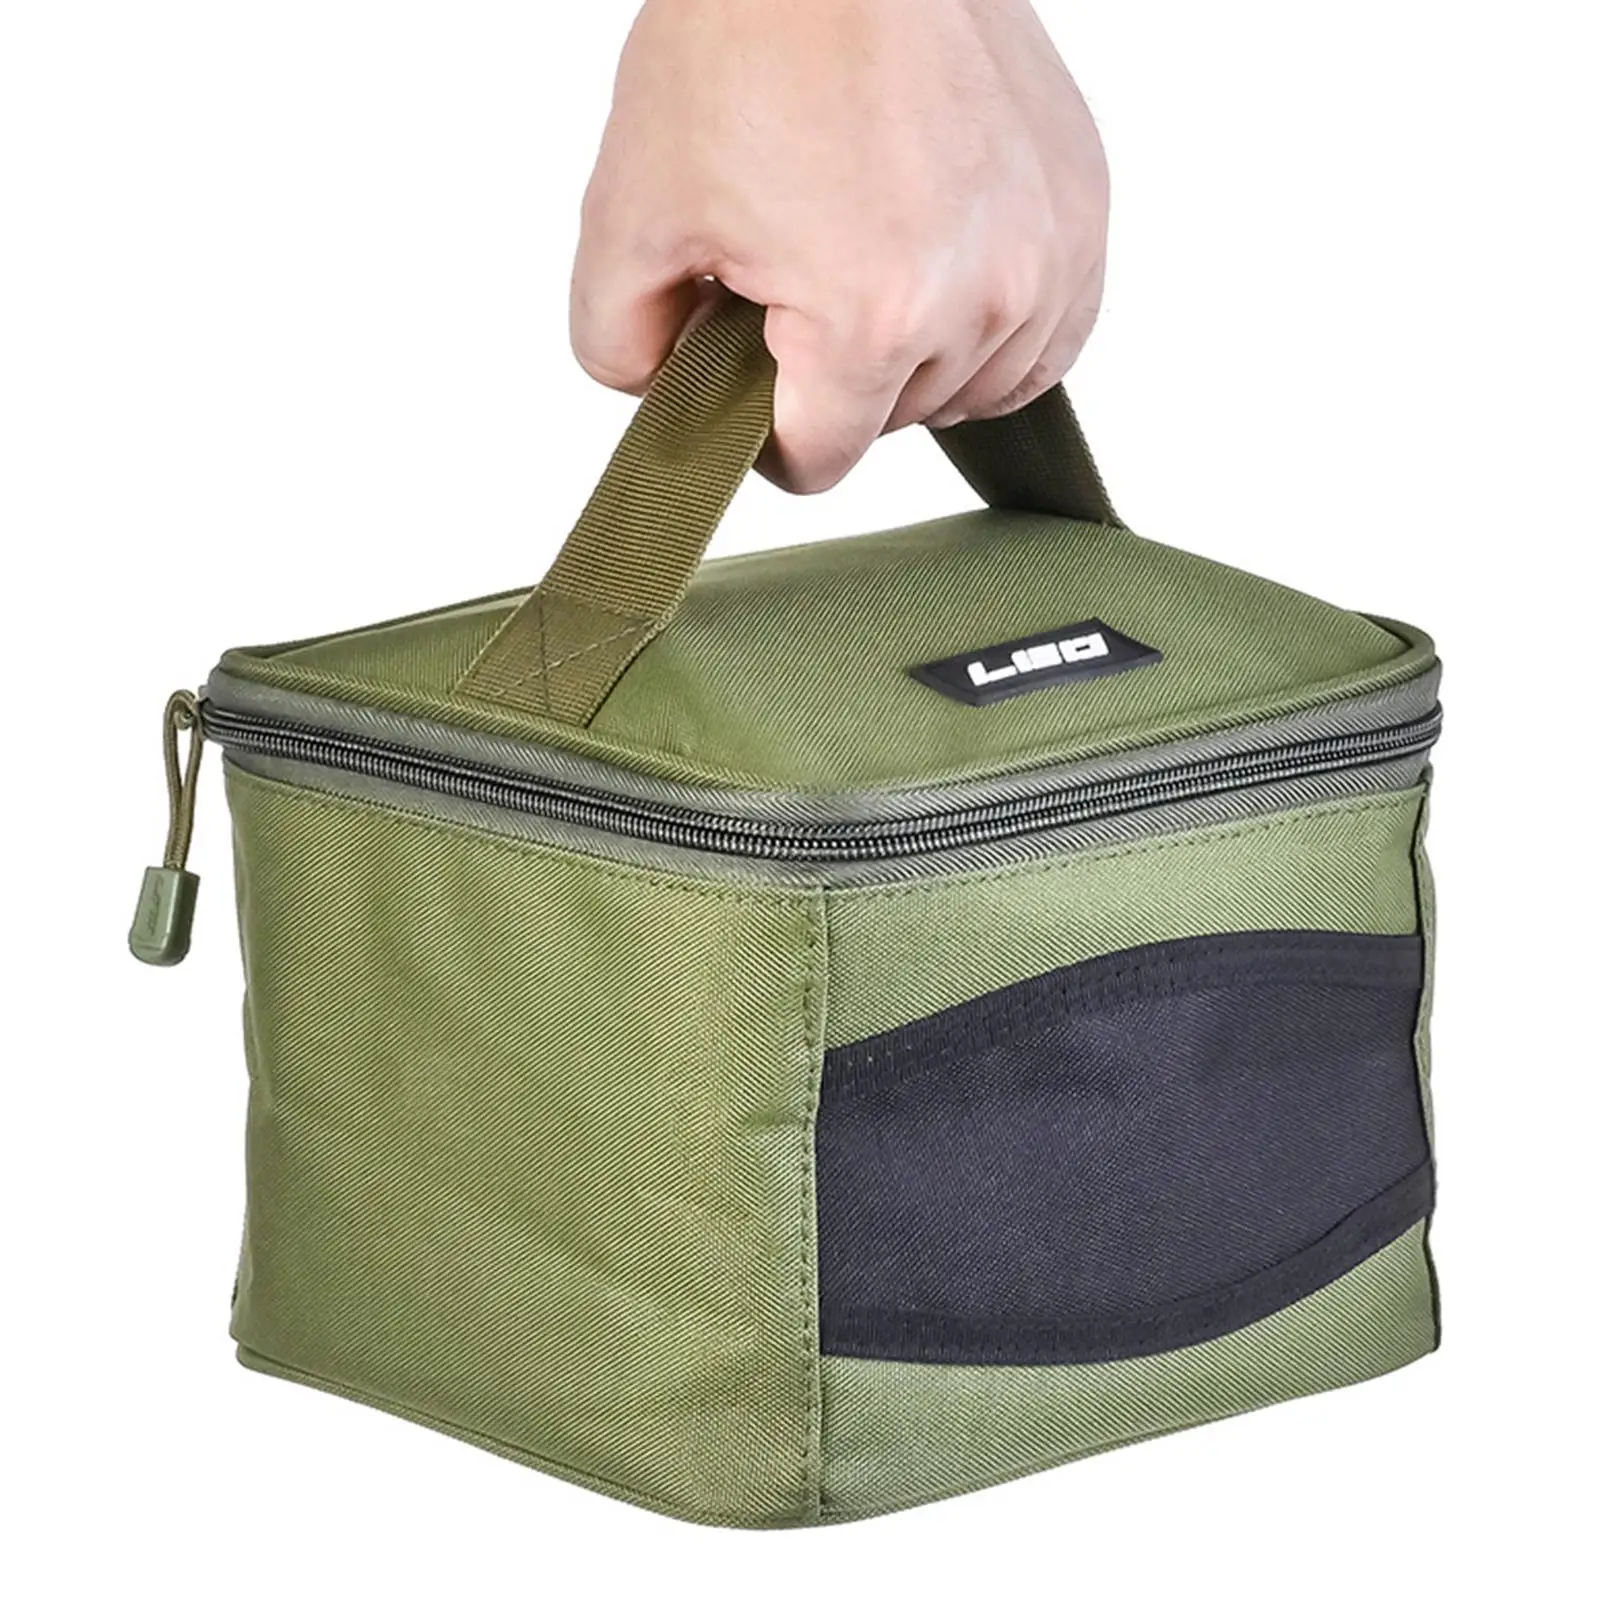 Multifunctional Fishing Reel Storage Bag Protective Case Oxford for Hiking